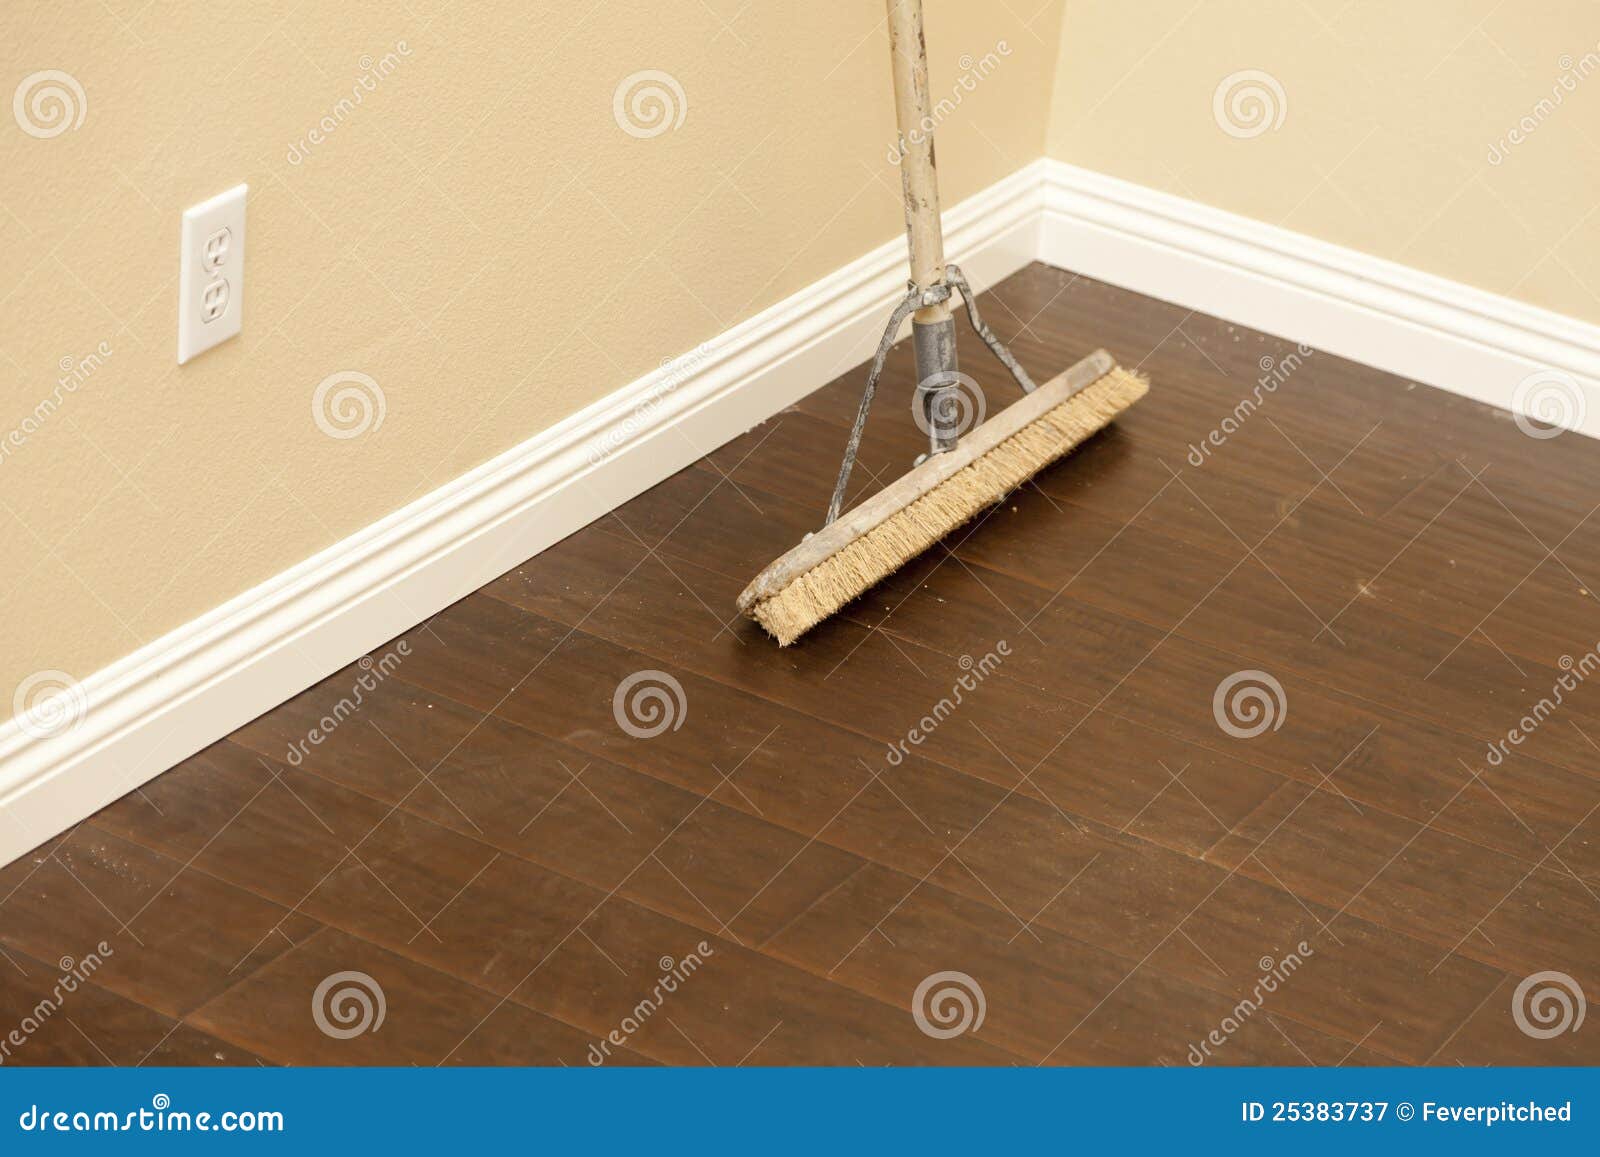 Push Broom On A Newly Installed Laminate Floor And Baseboard Stock